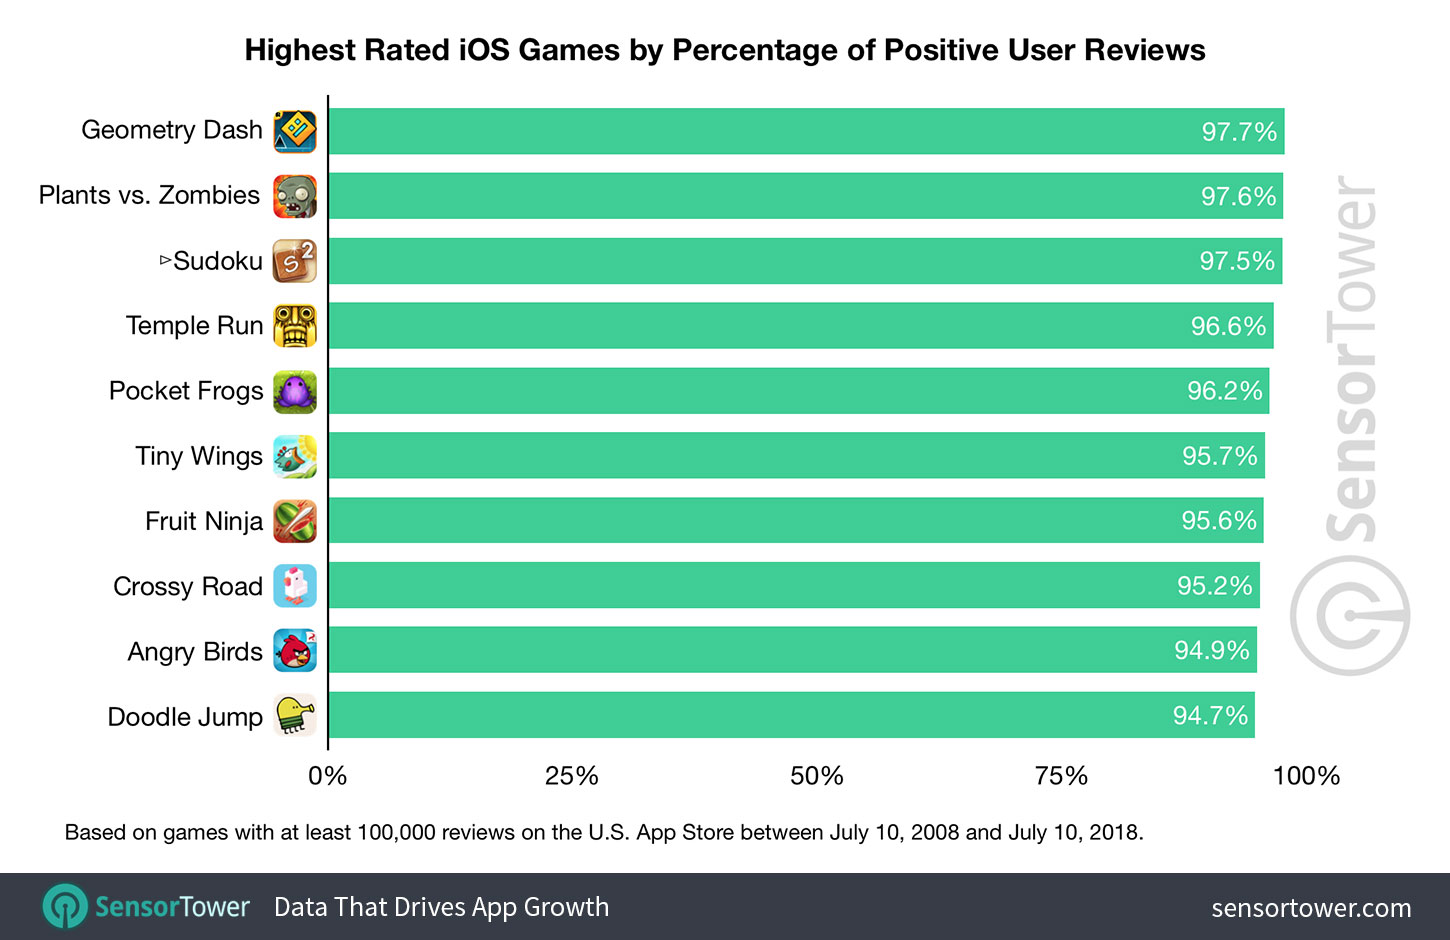 Chart showing a ranking of the highest rated games on the U.S. App Store between 2008 and 2018